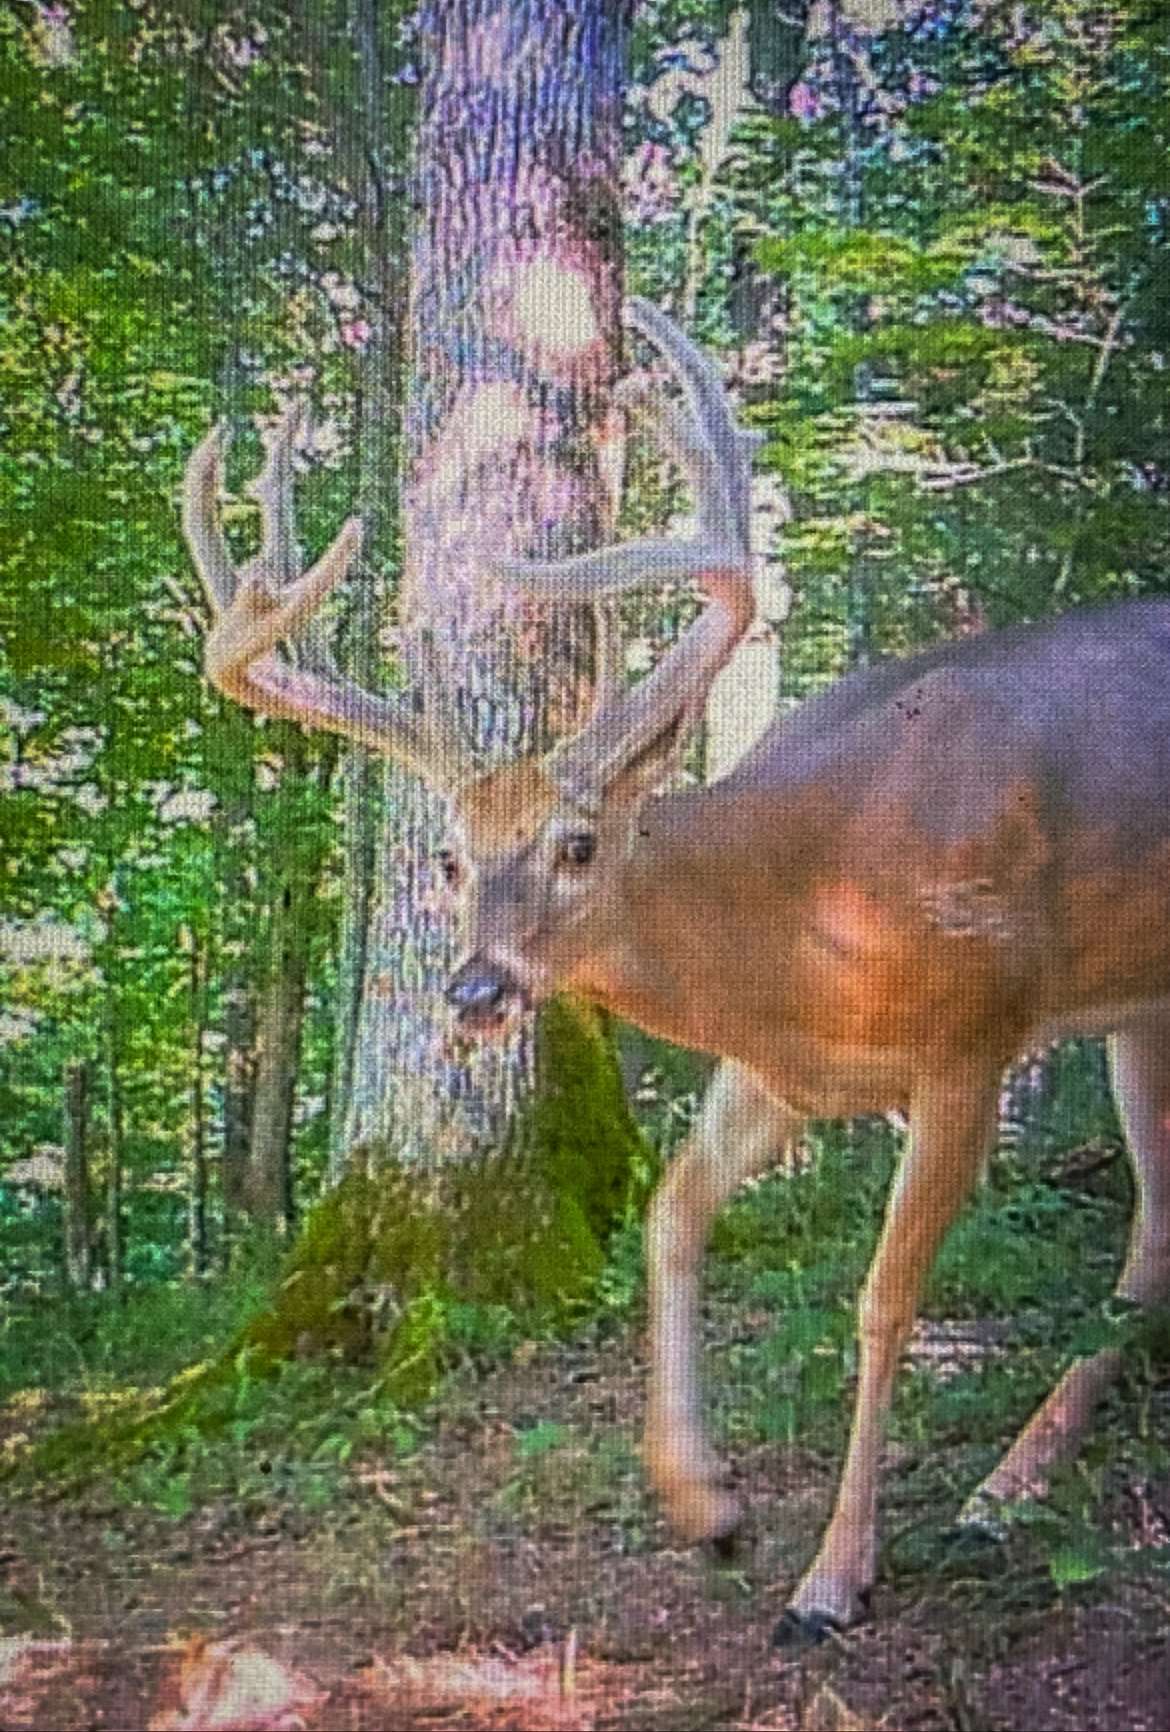 Regular trail cam photos let Martin know the buck was still in the area.